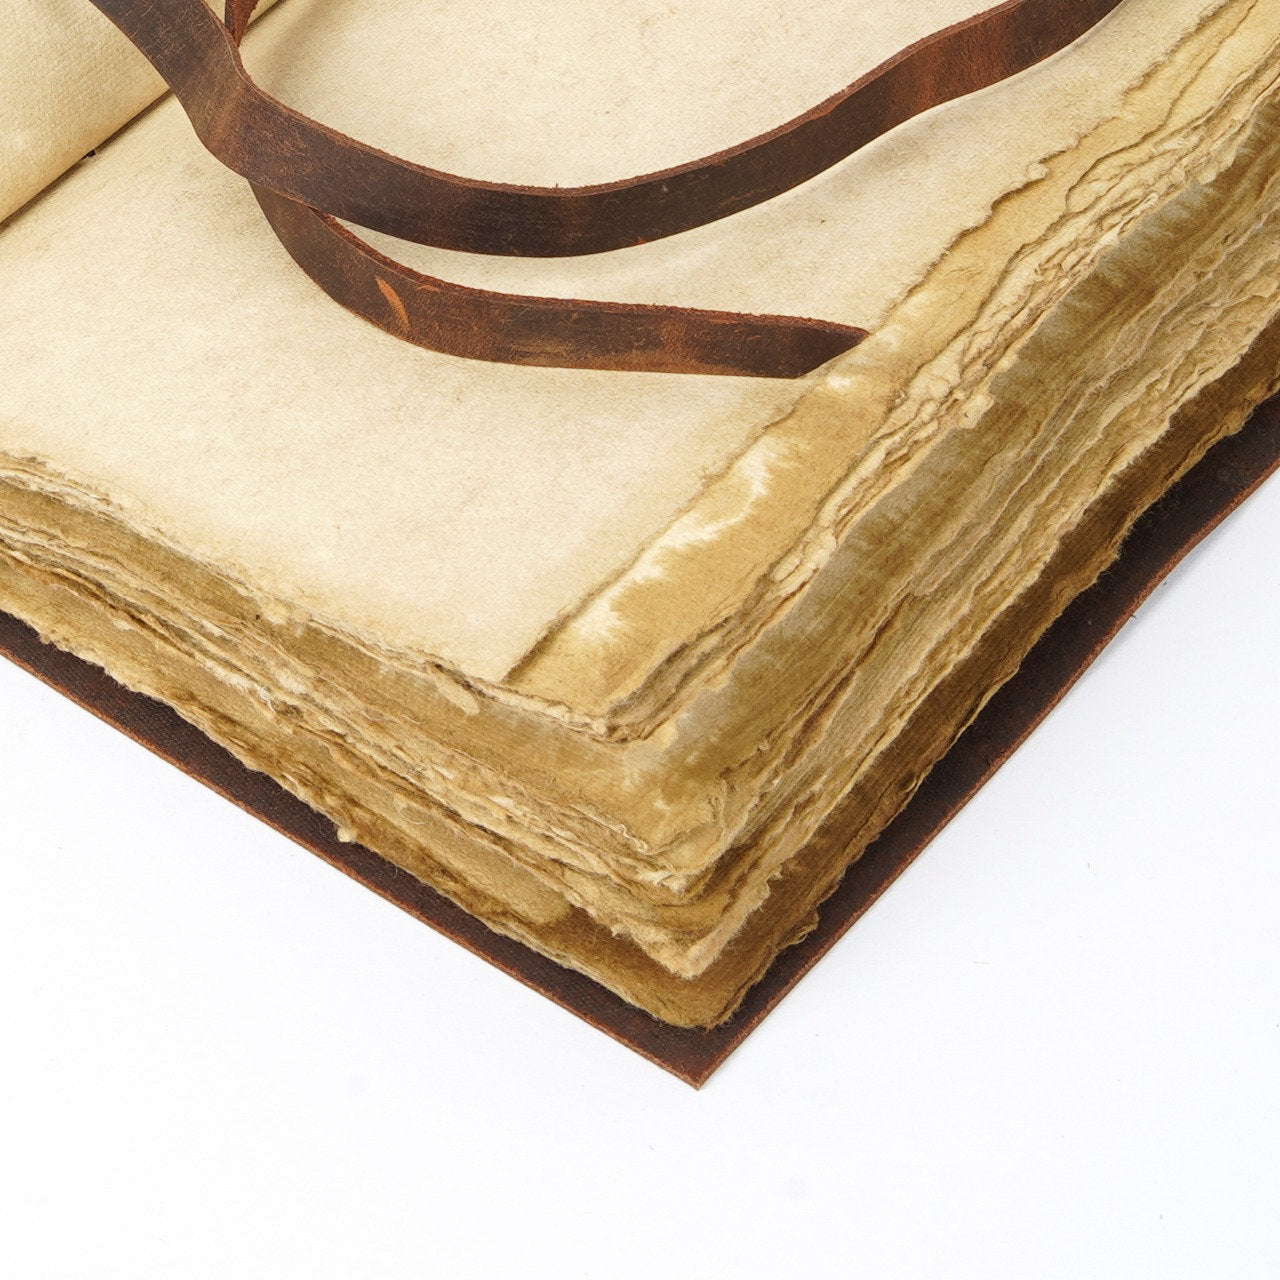 Vintage Recycled Paper Journal